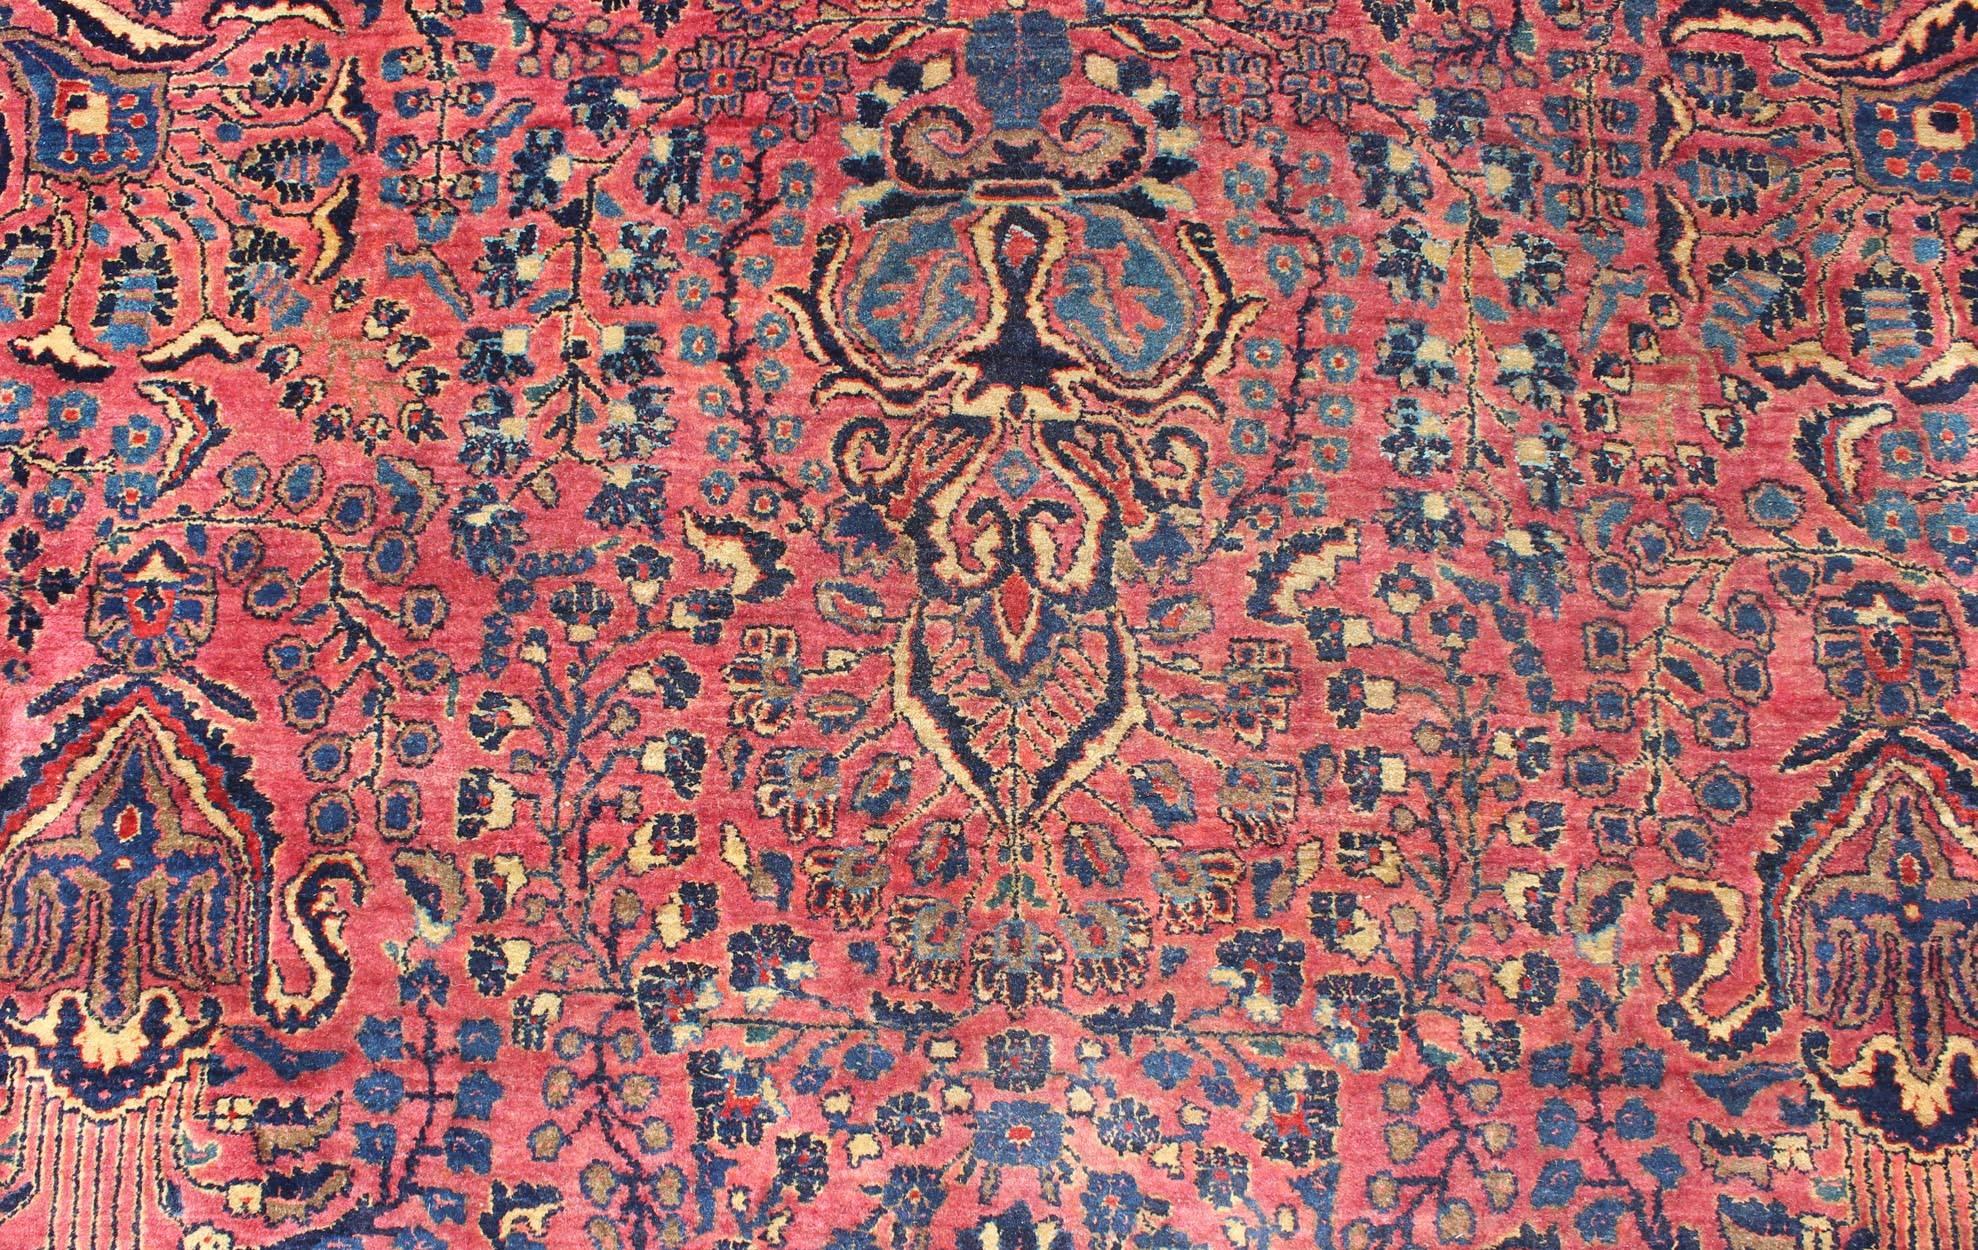 Antique Persian Sarouk Carpet with Deep Cranberry Field and Floral Elements 1